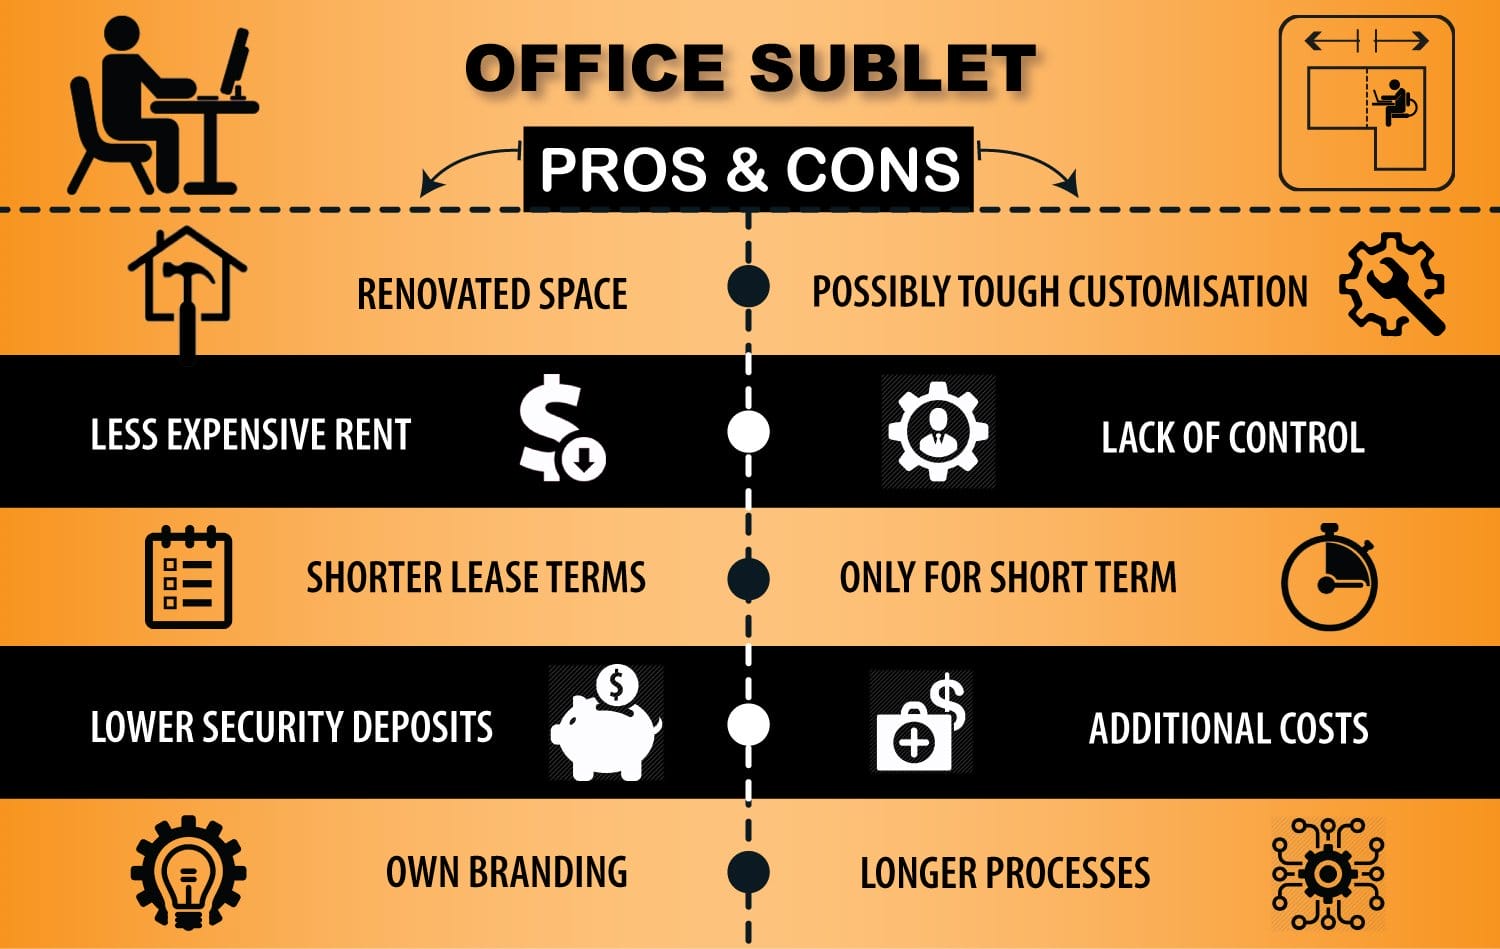 Pros and Cons of Office Sublets